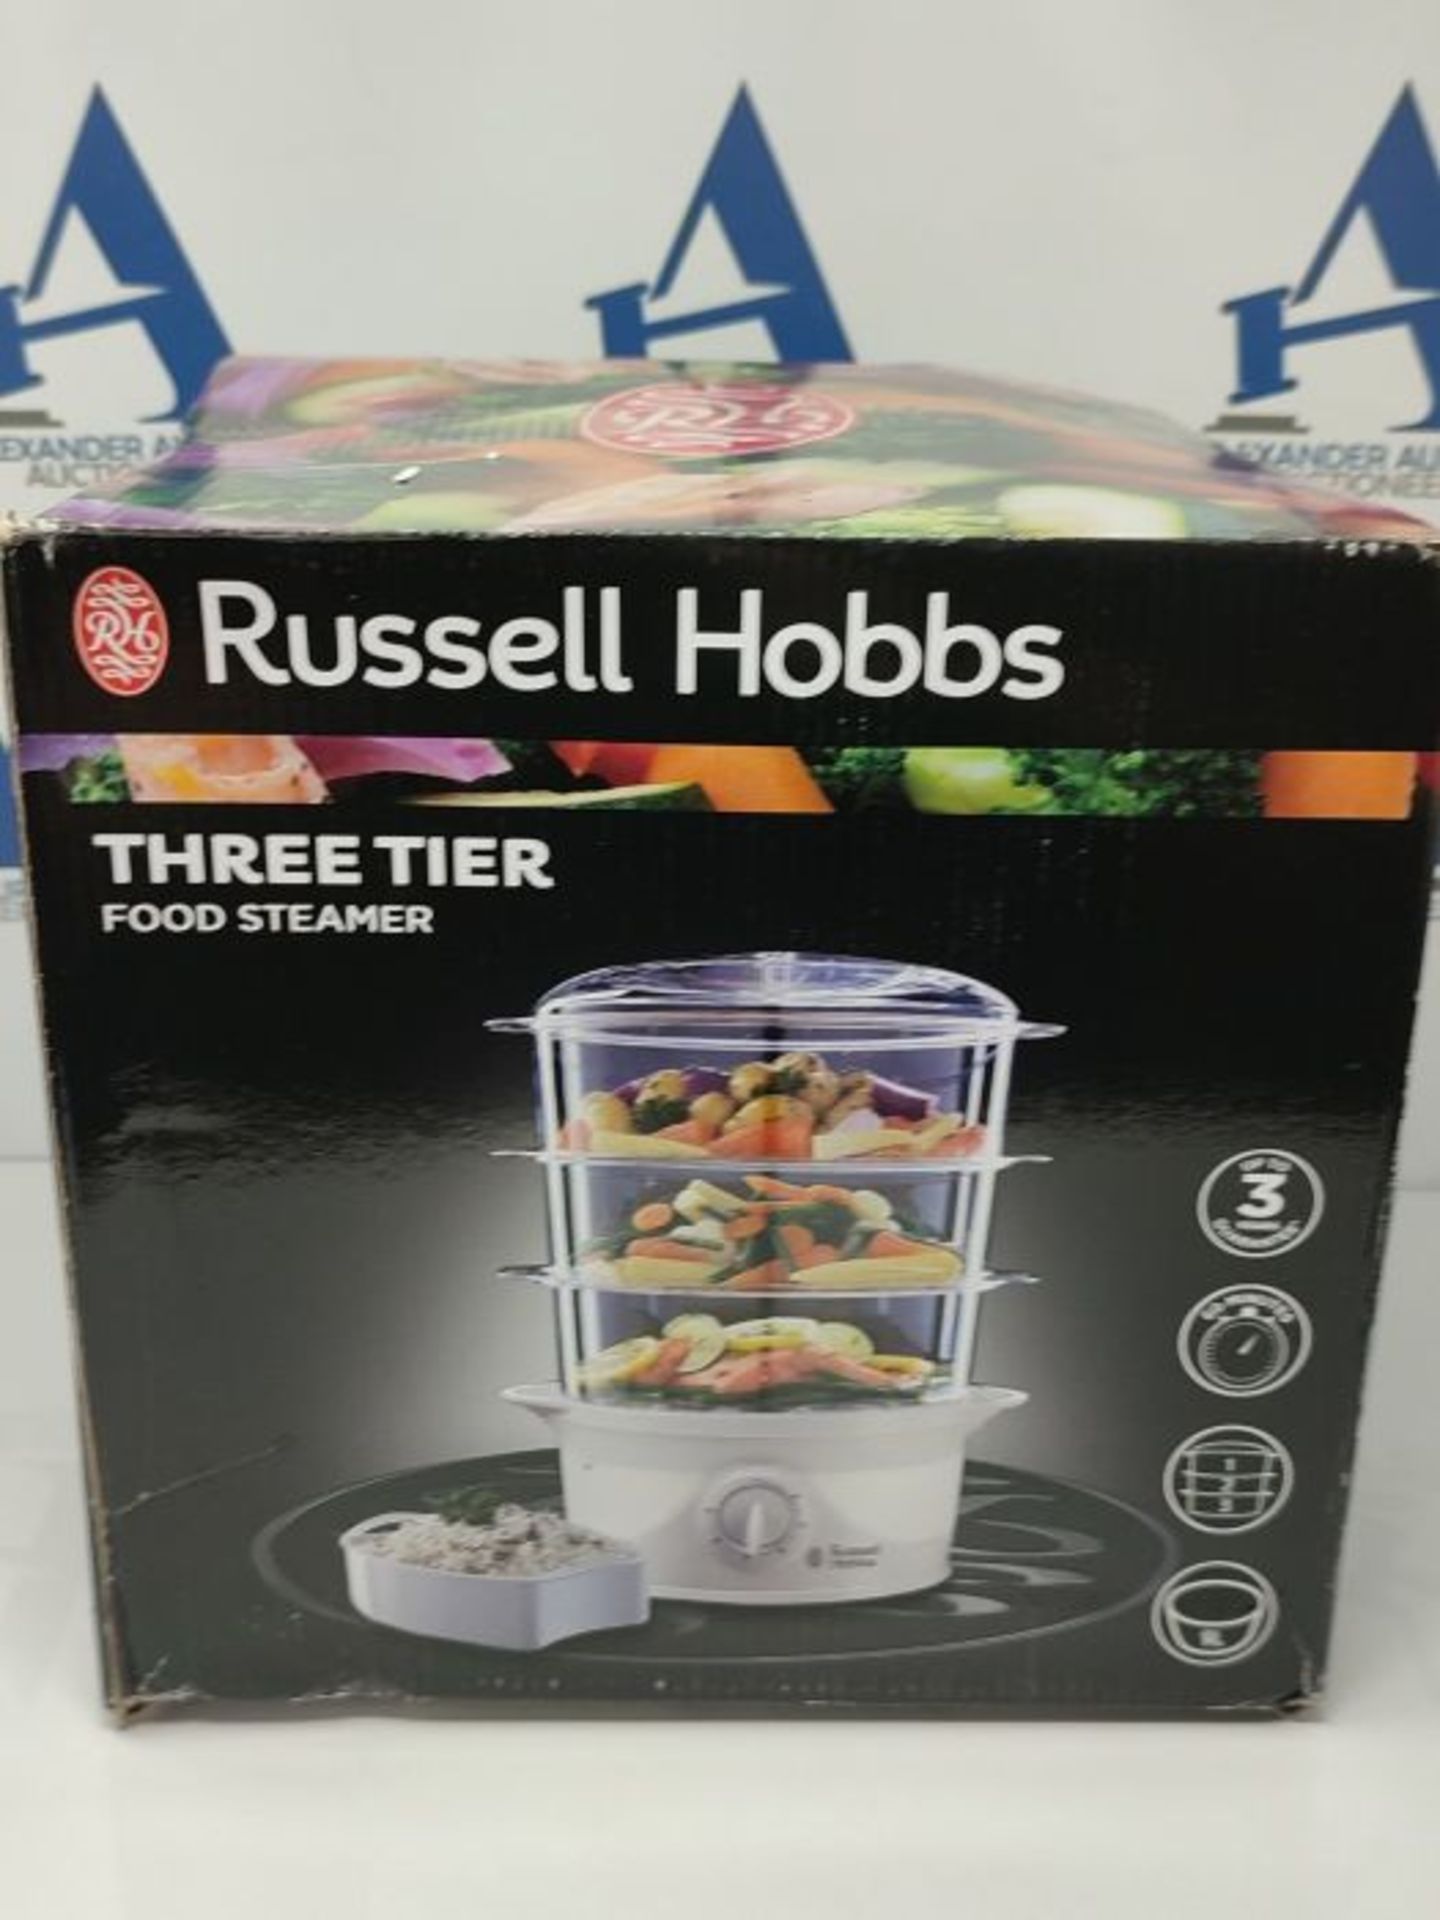 Russell Hobbs 21140 3-Tier Food Steamer, 800 W, 9 Litre, White - Image 2 of 3